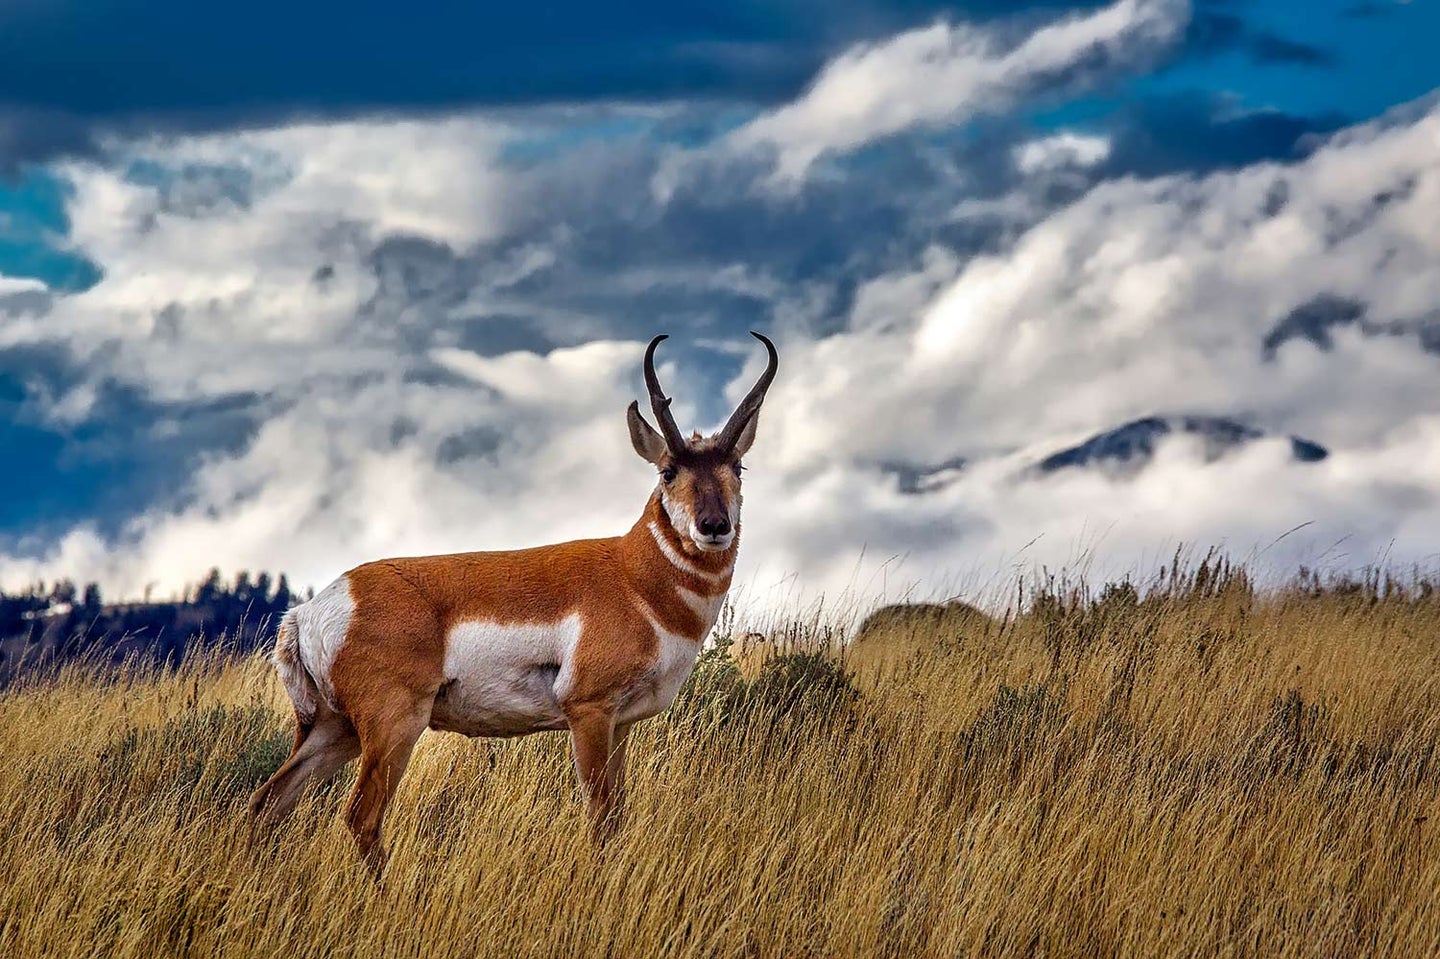 A pronghorn antelope standing in a field with tall grass.